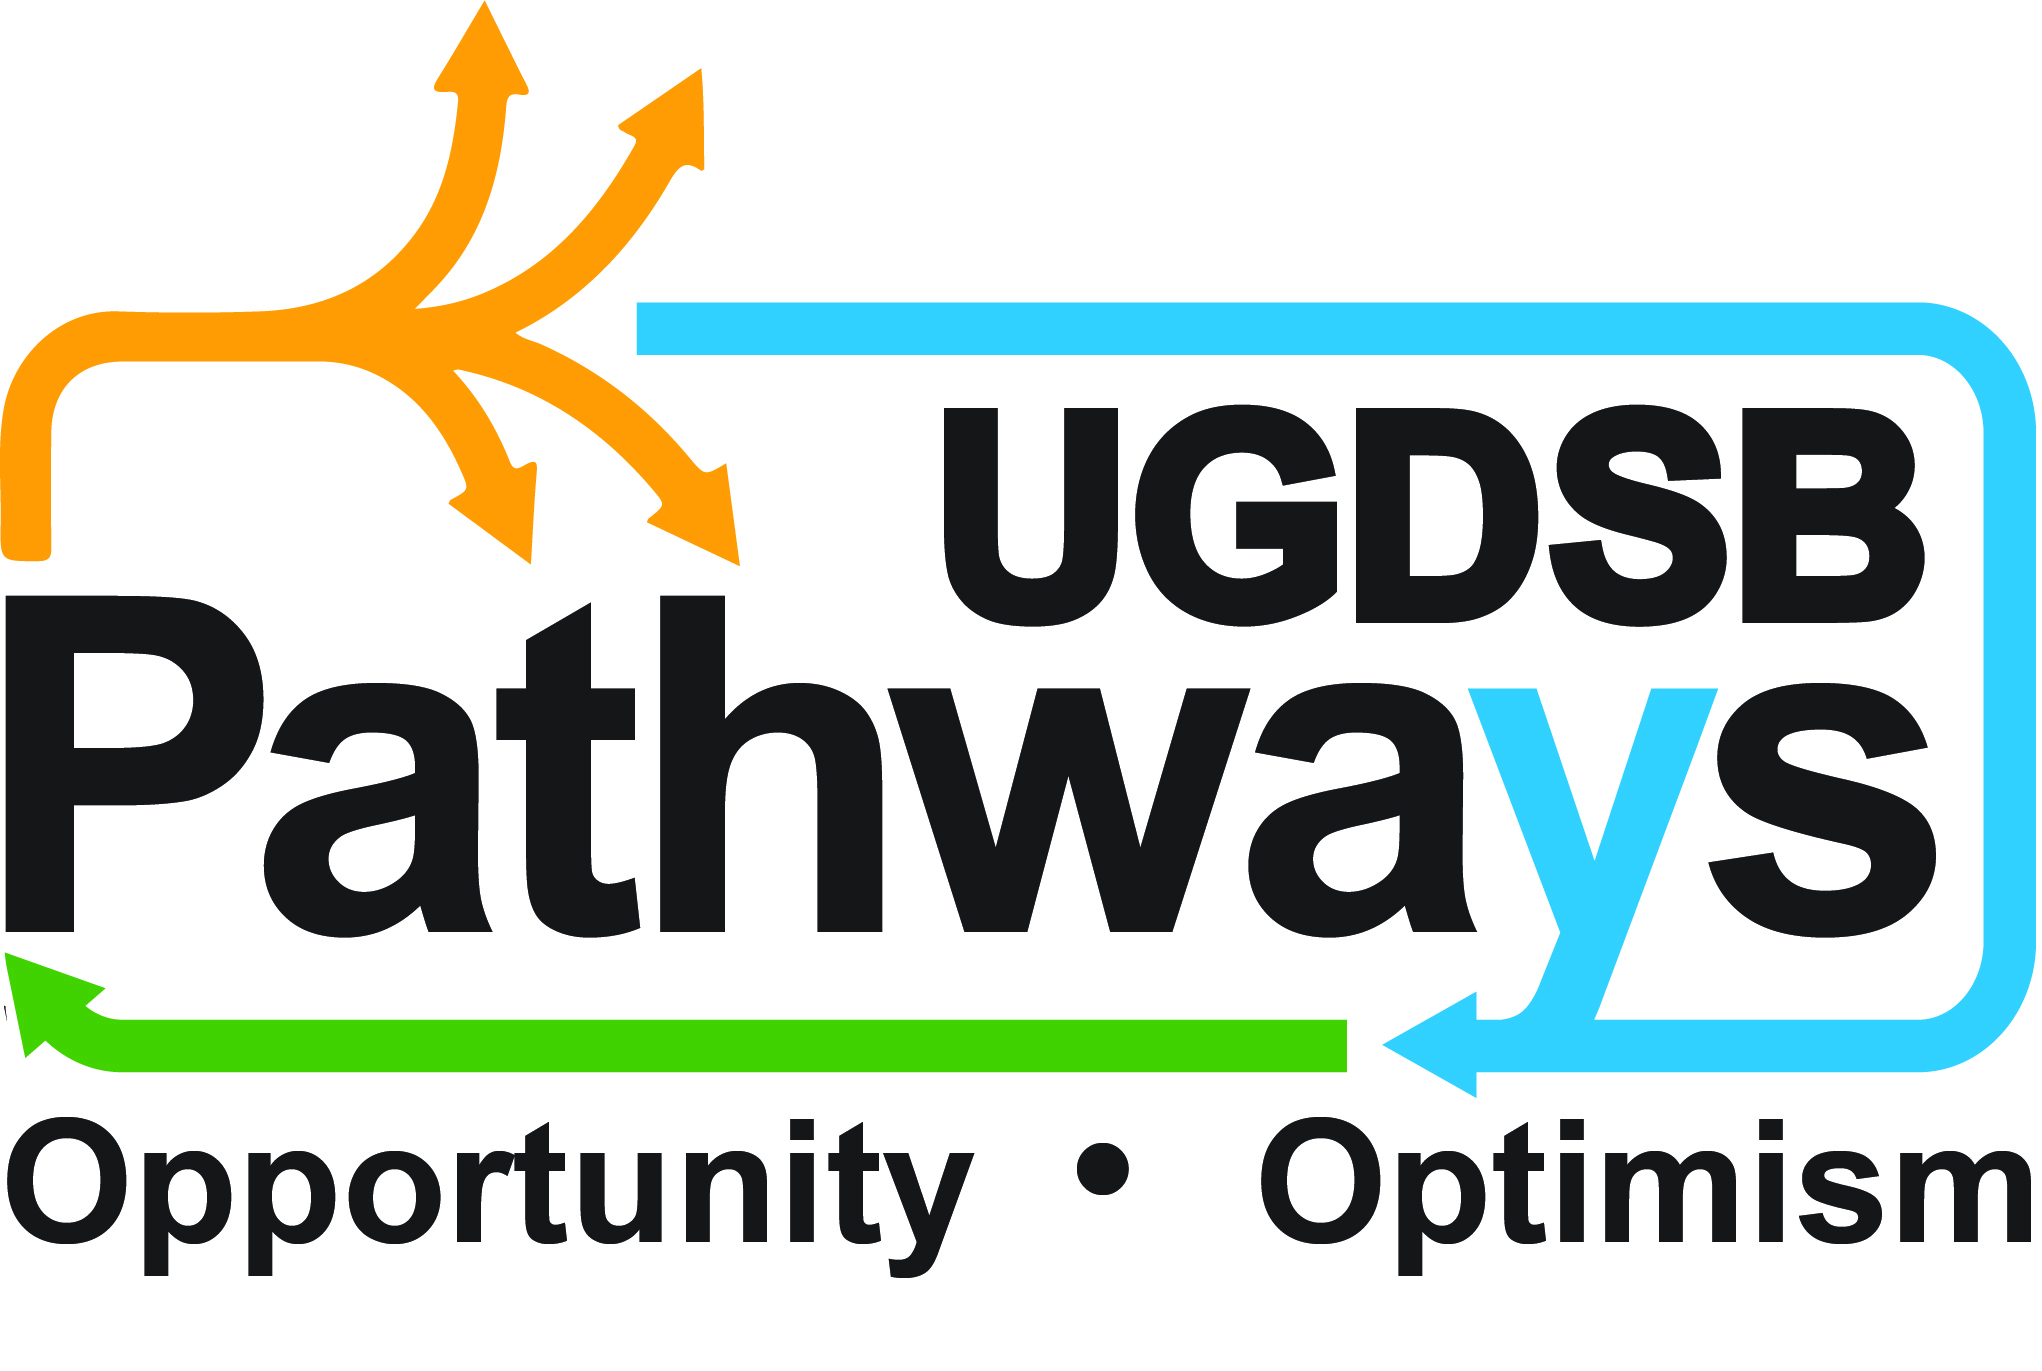 UGDSB Pathways logo featuring text that says Opportunity and Optimism